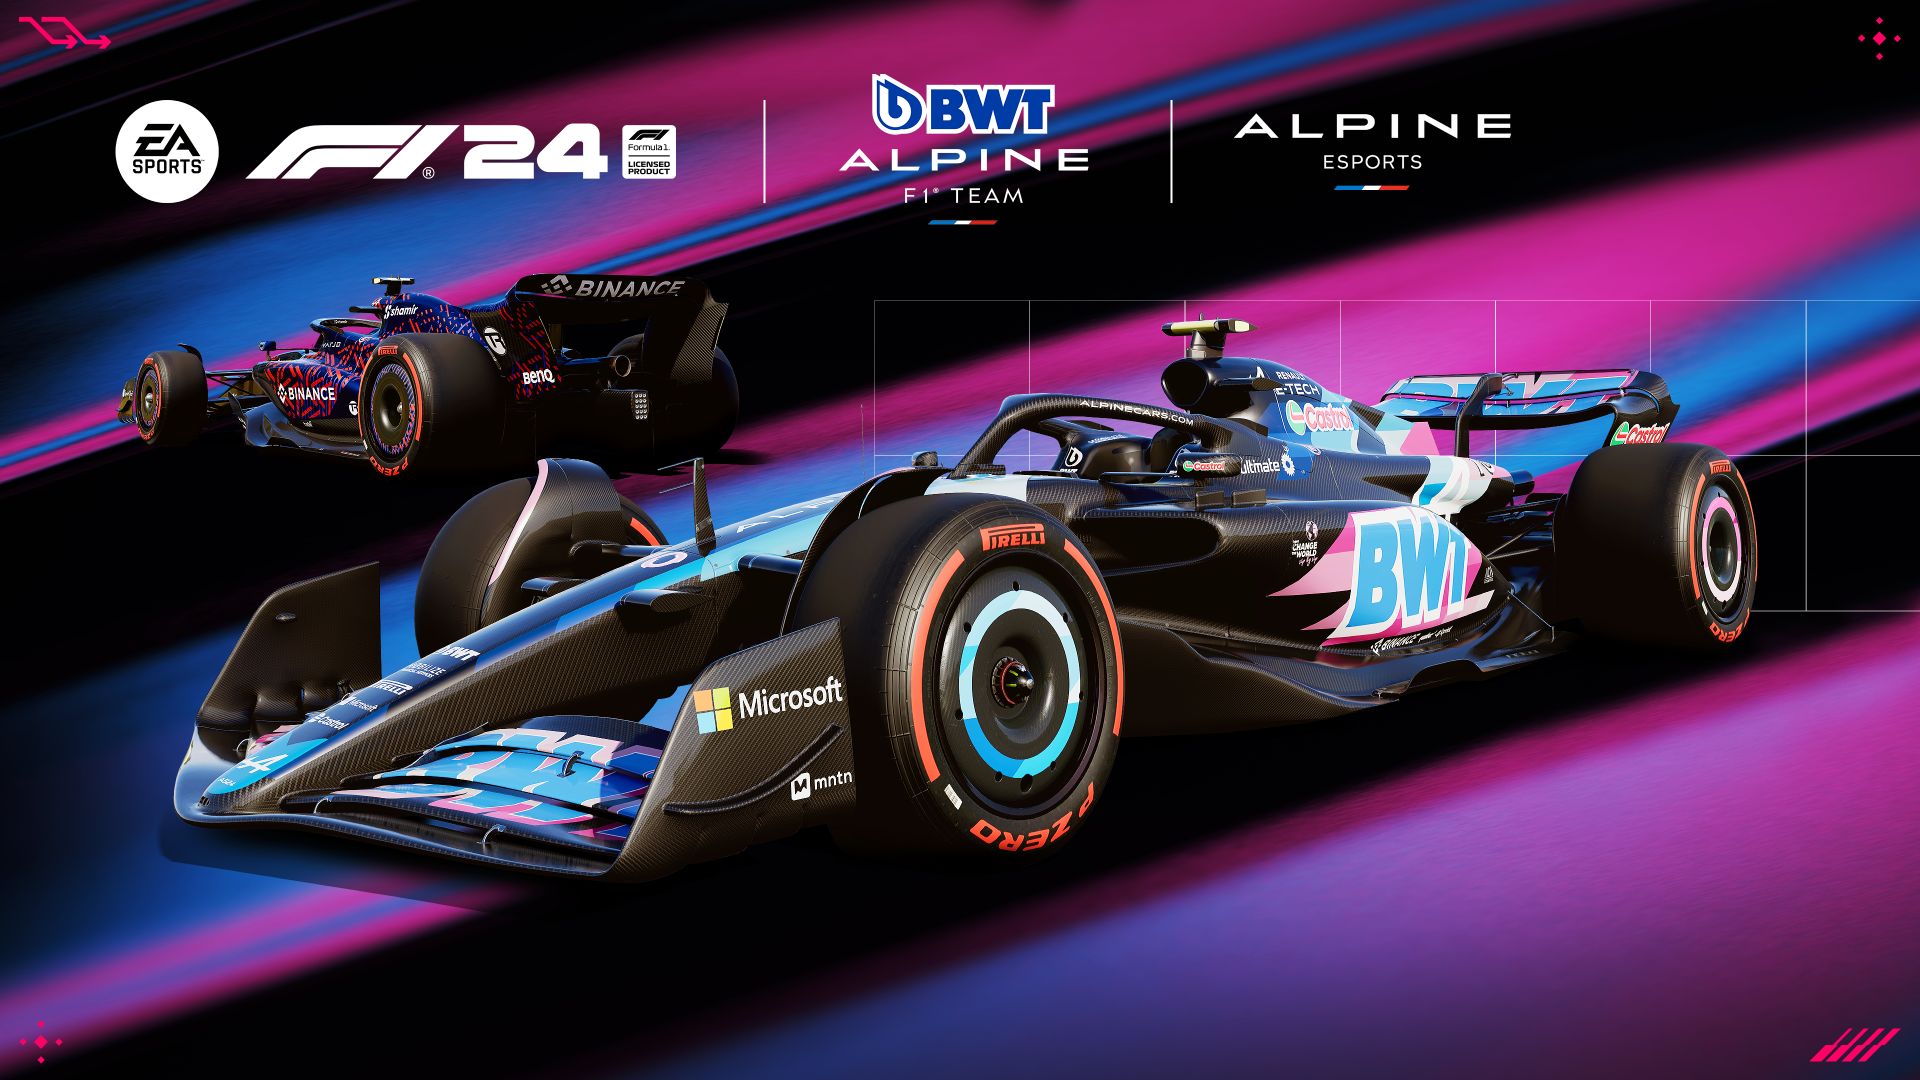 How BWT Alpine F1 Racing Team Developed Their Car for EA Sports F1 24